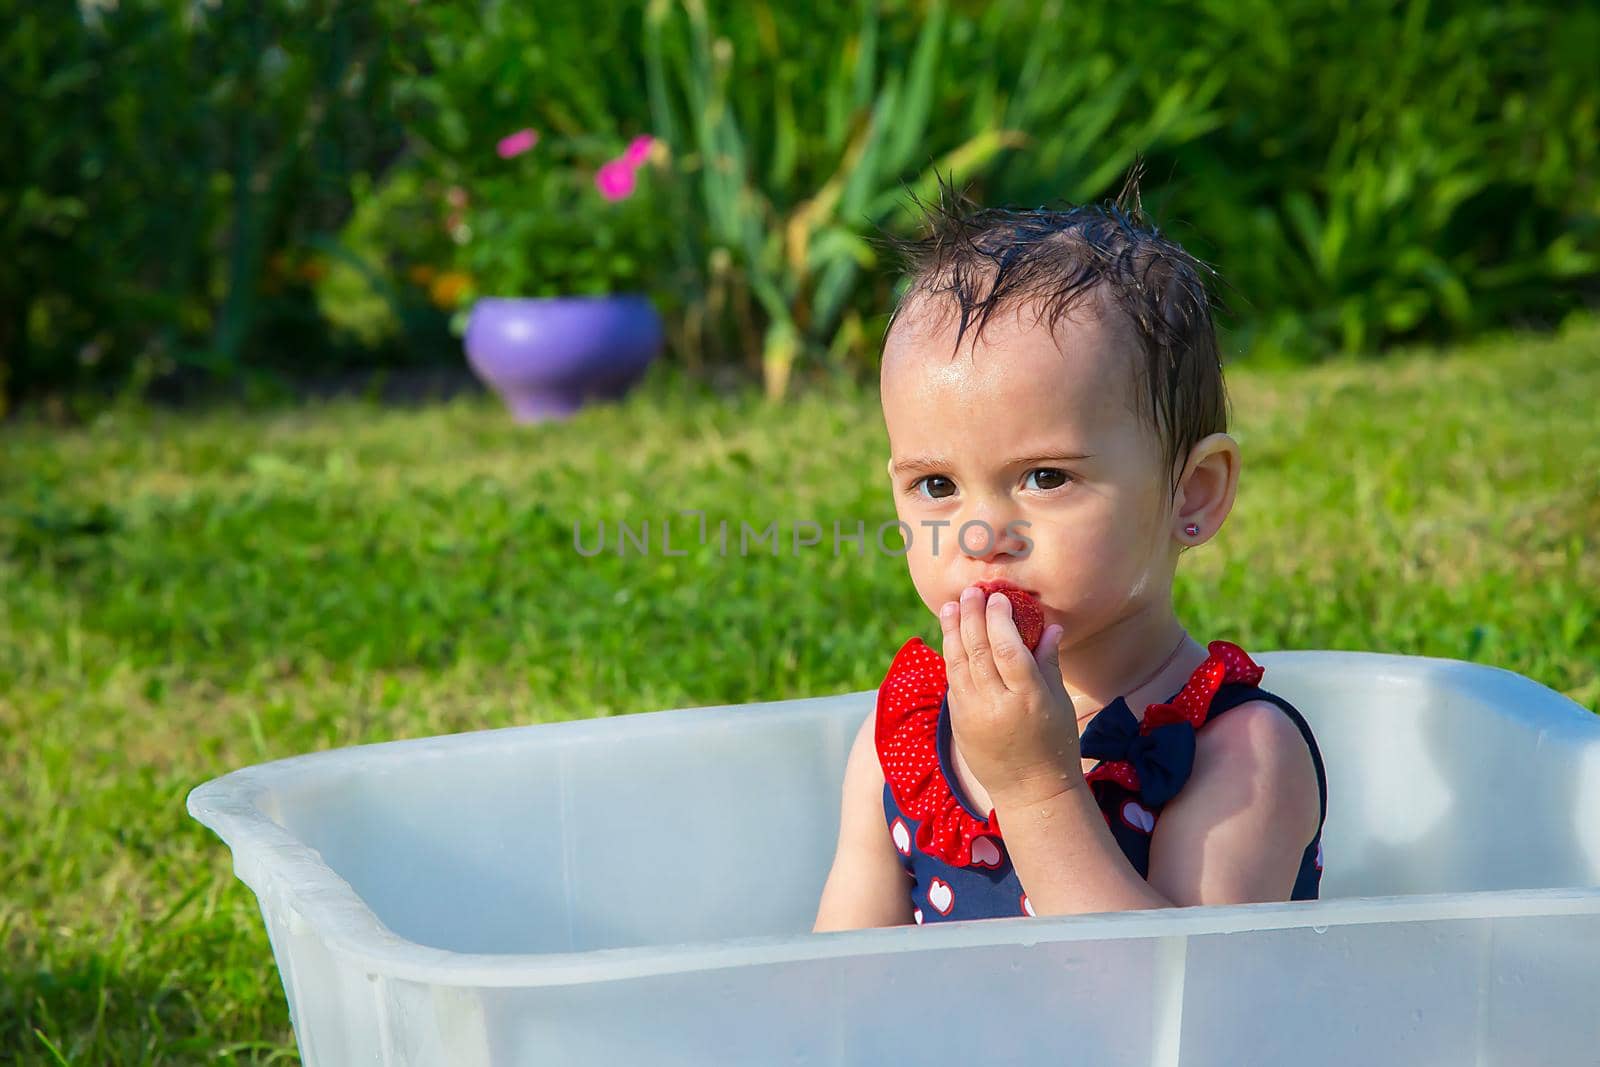 A little girl in a swimsuit sitting in a white bath and eating strawberries